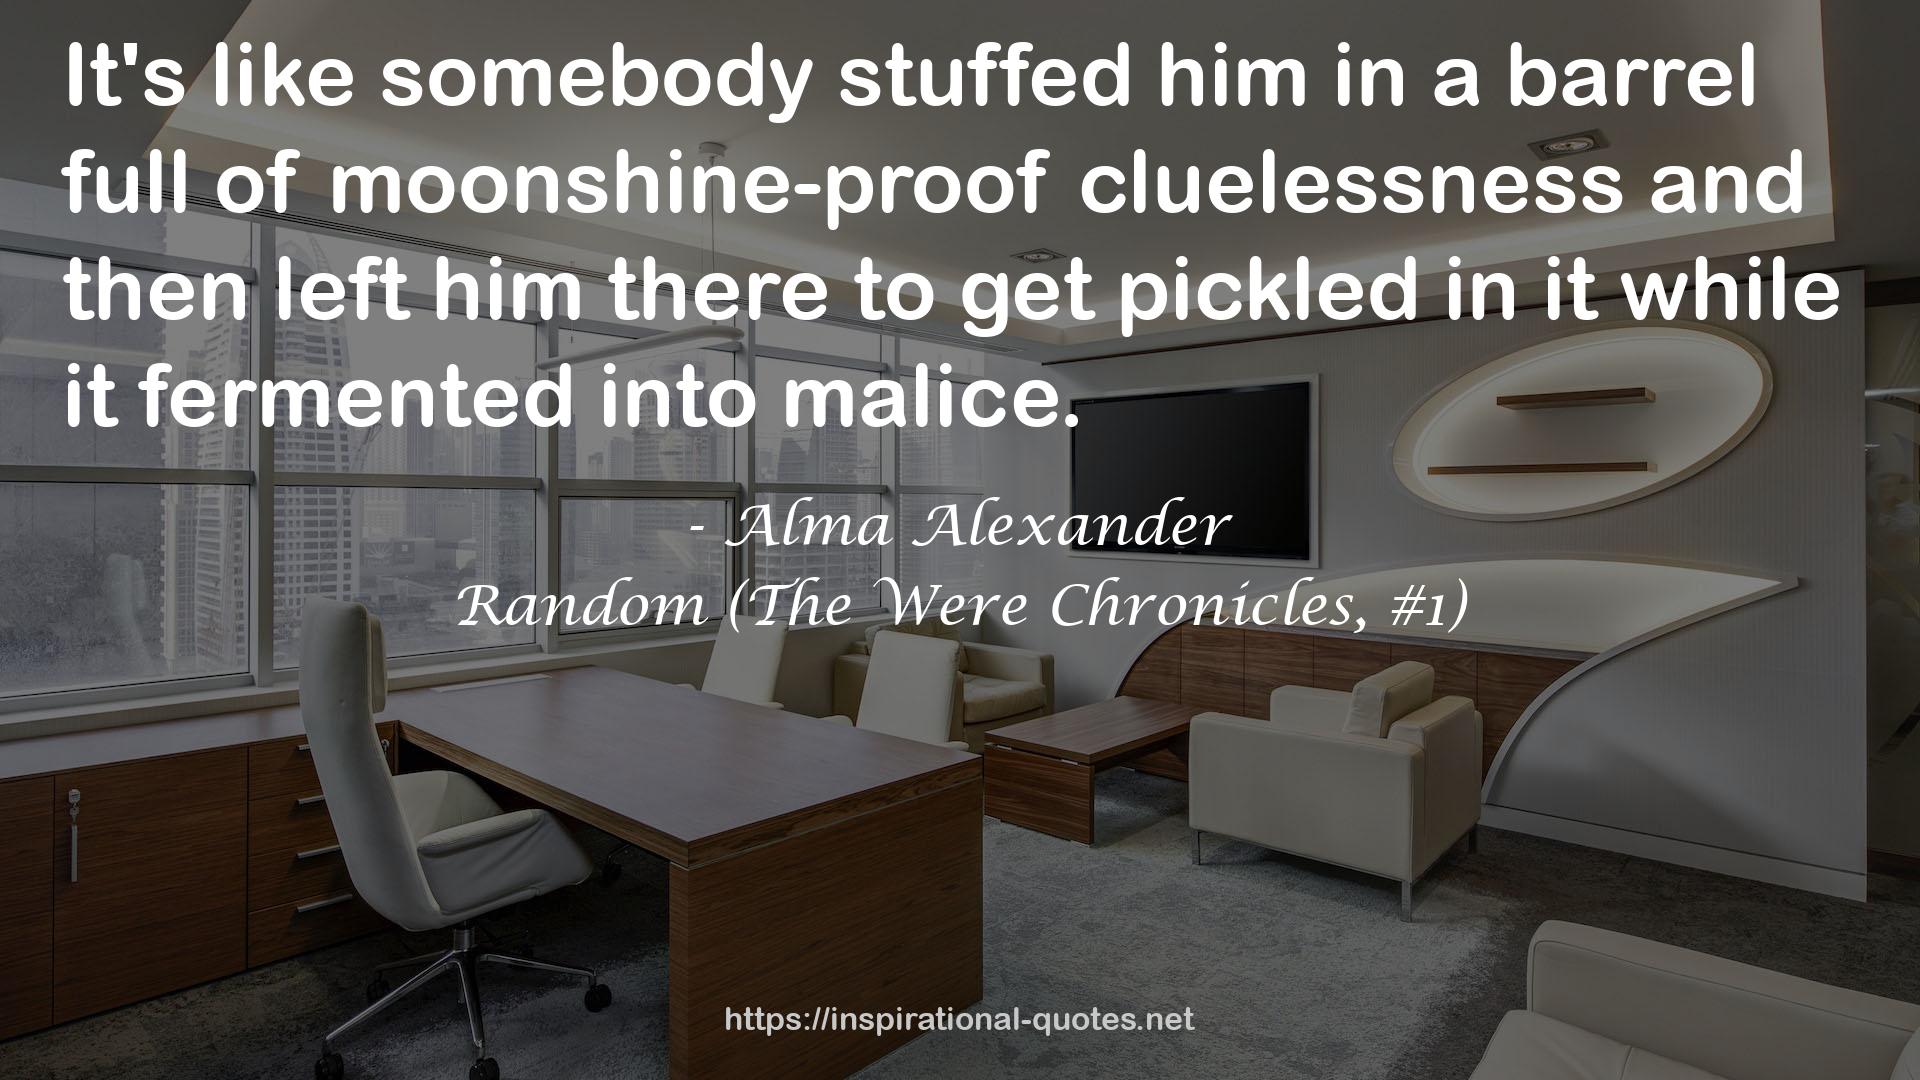 Random (The Were Chronicles, #1) QUOTES